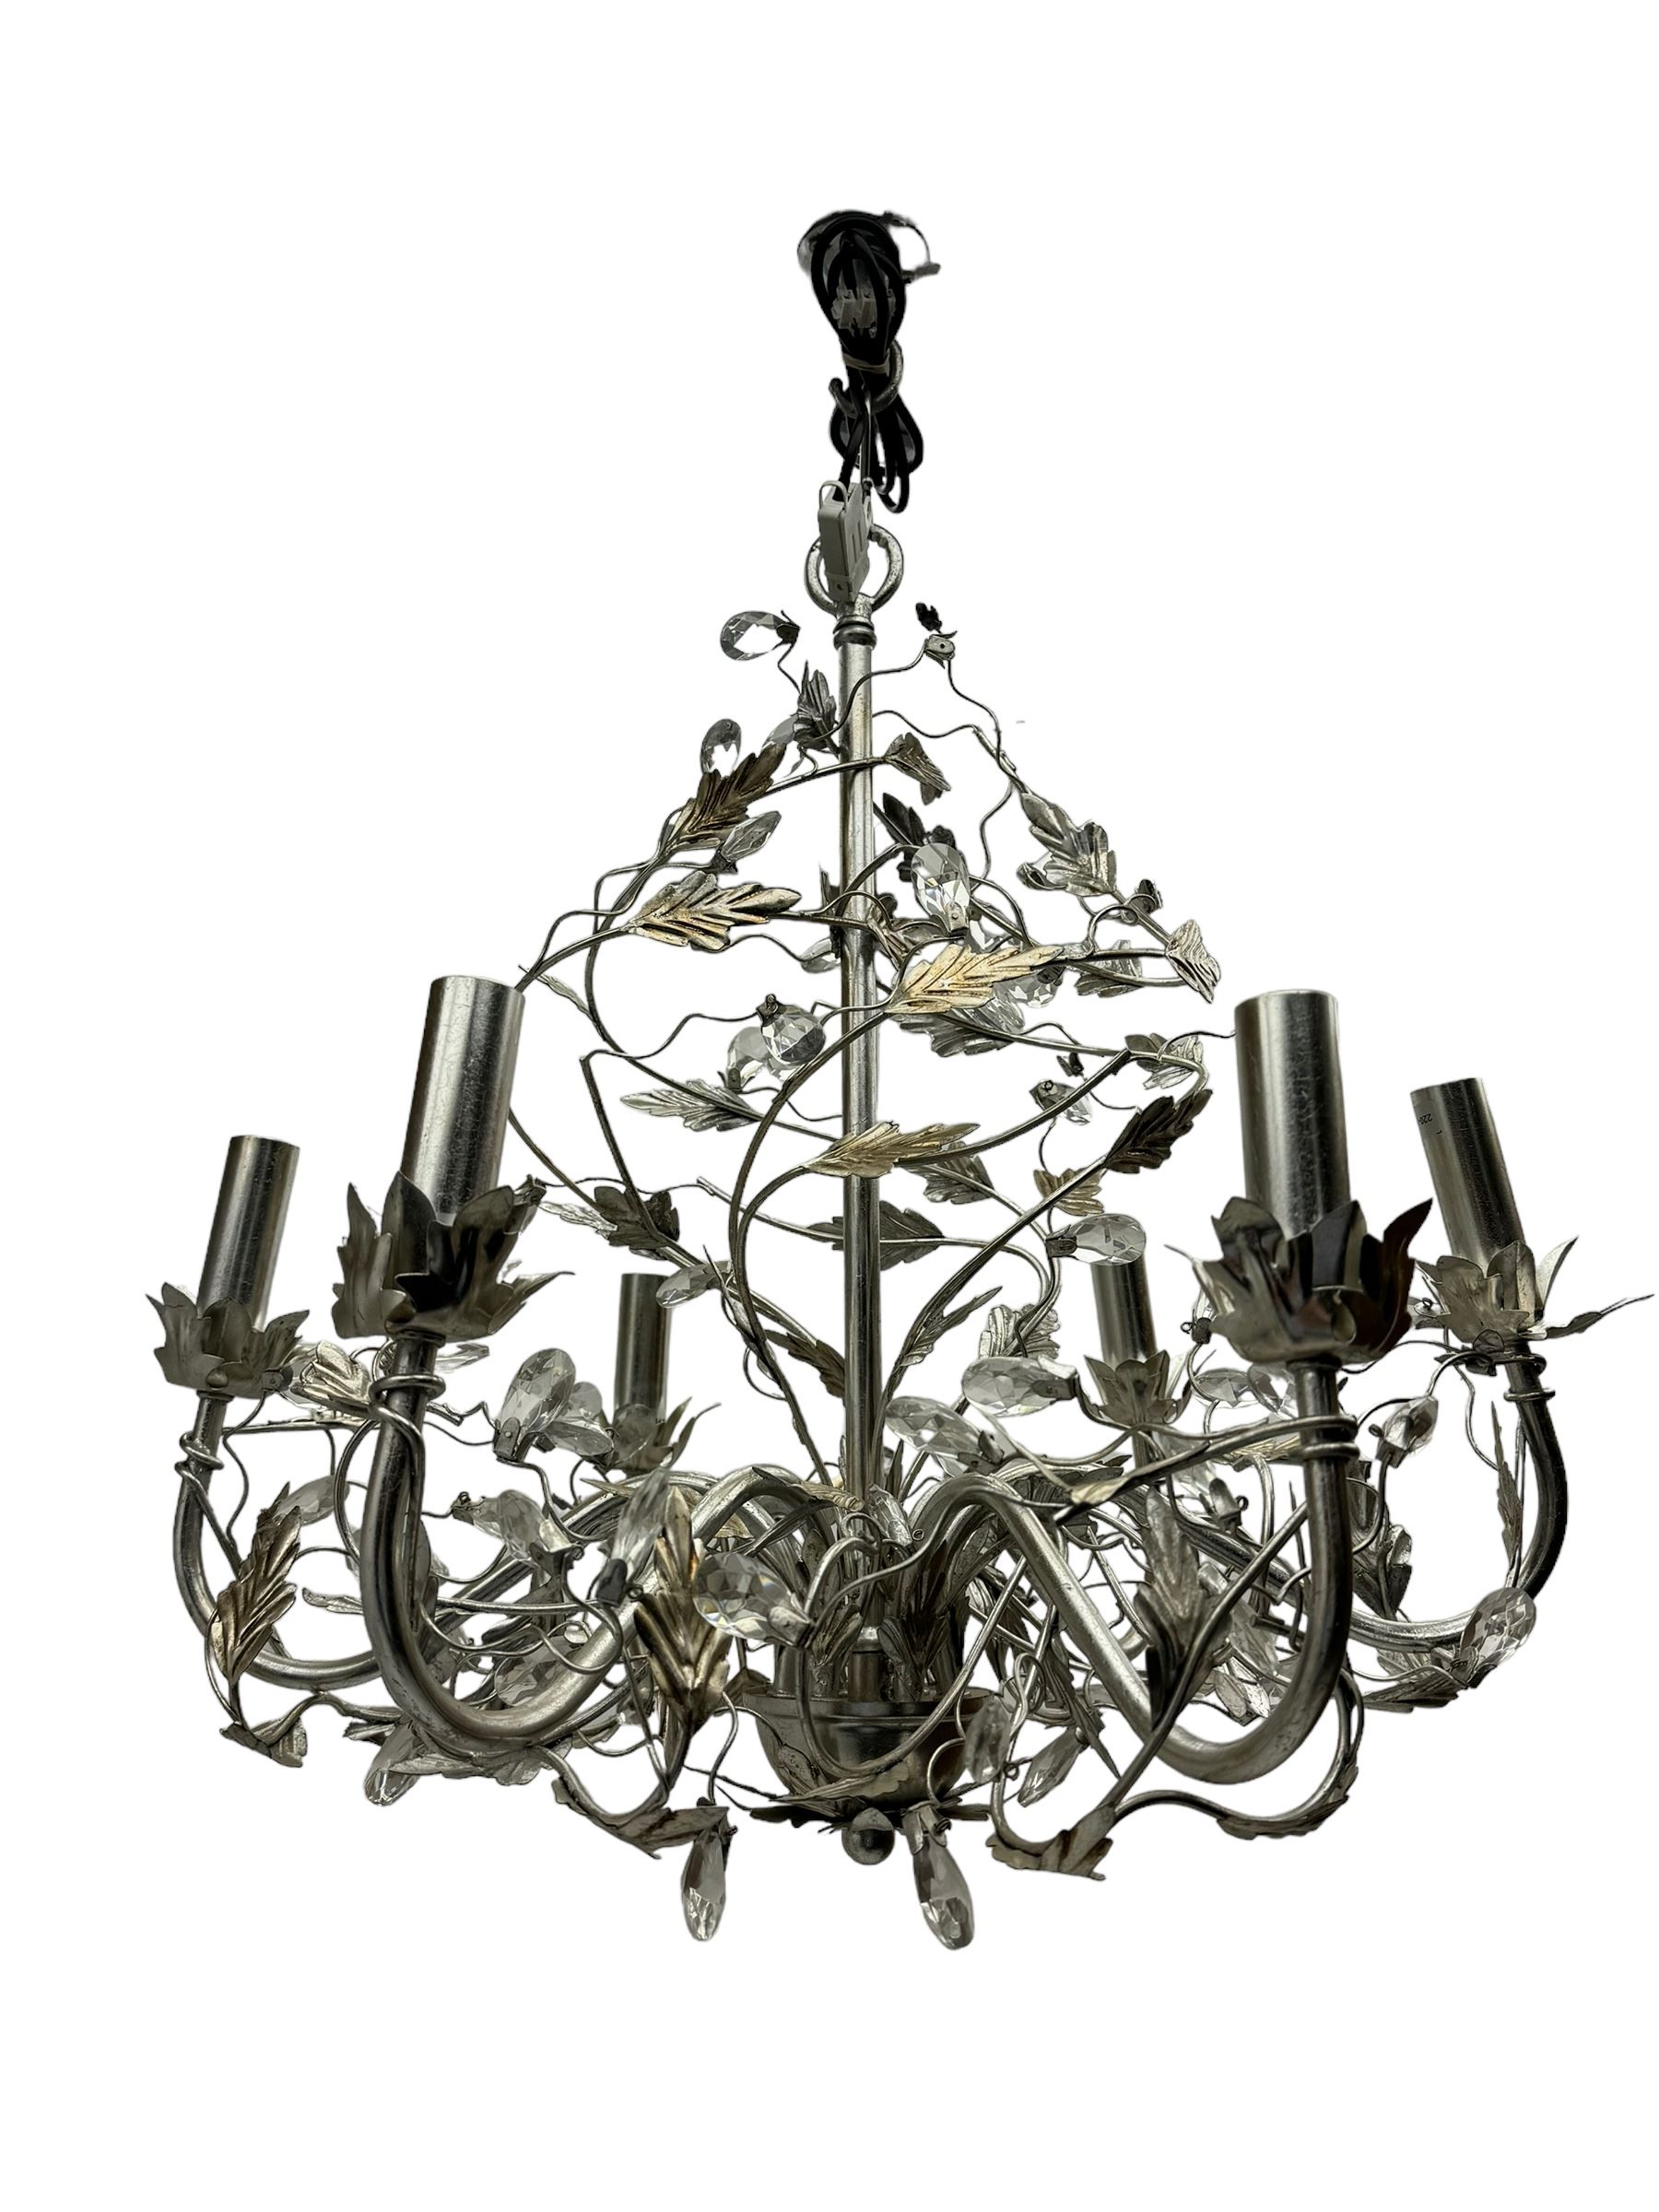 India Jane - silver finish metal chandelier - Image 8 of 8